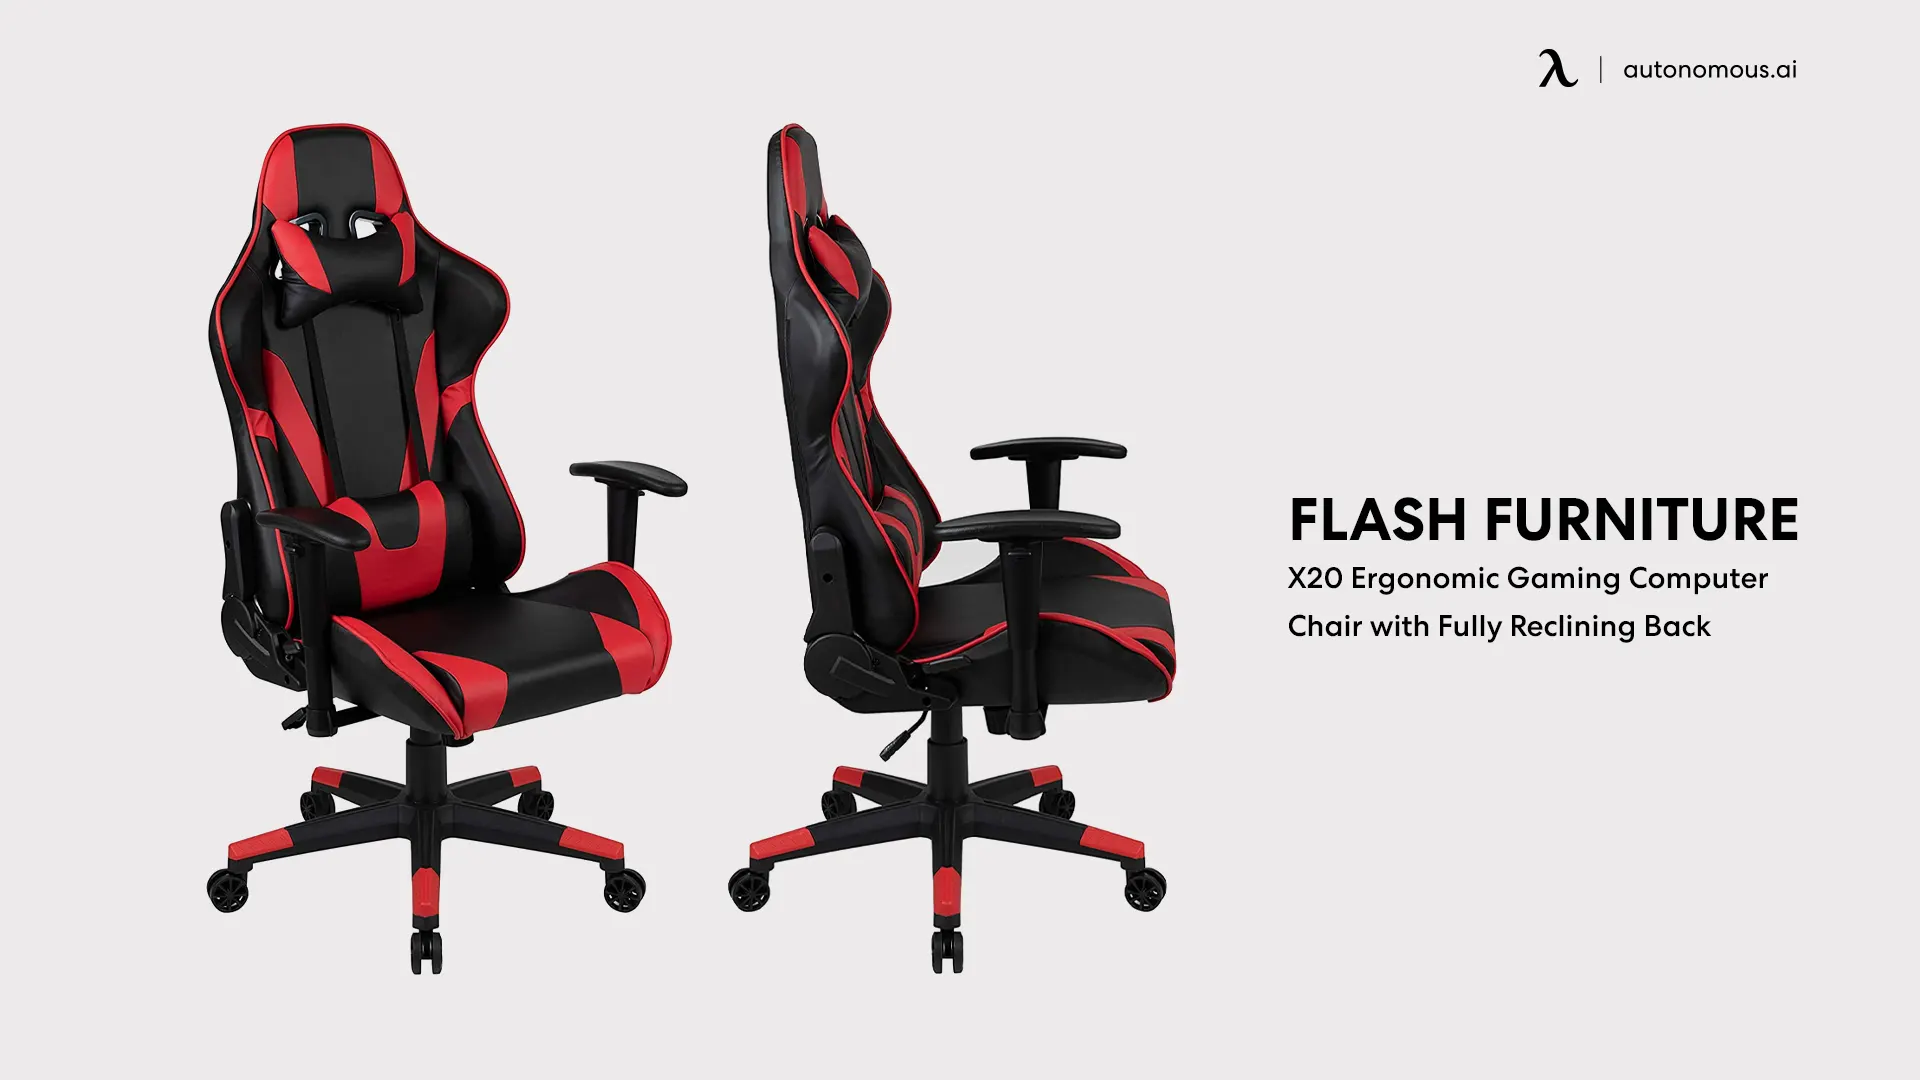 X20 Ergonomic Gaming Computer Chair with Fully Reclining Back